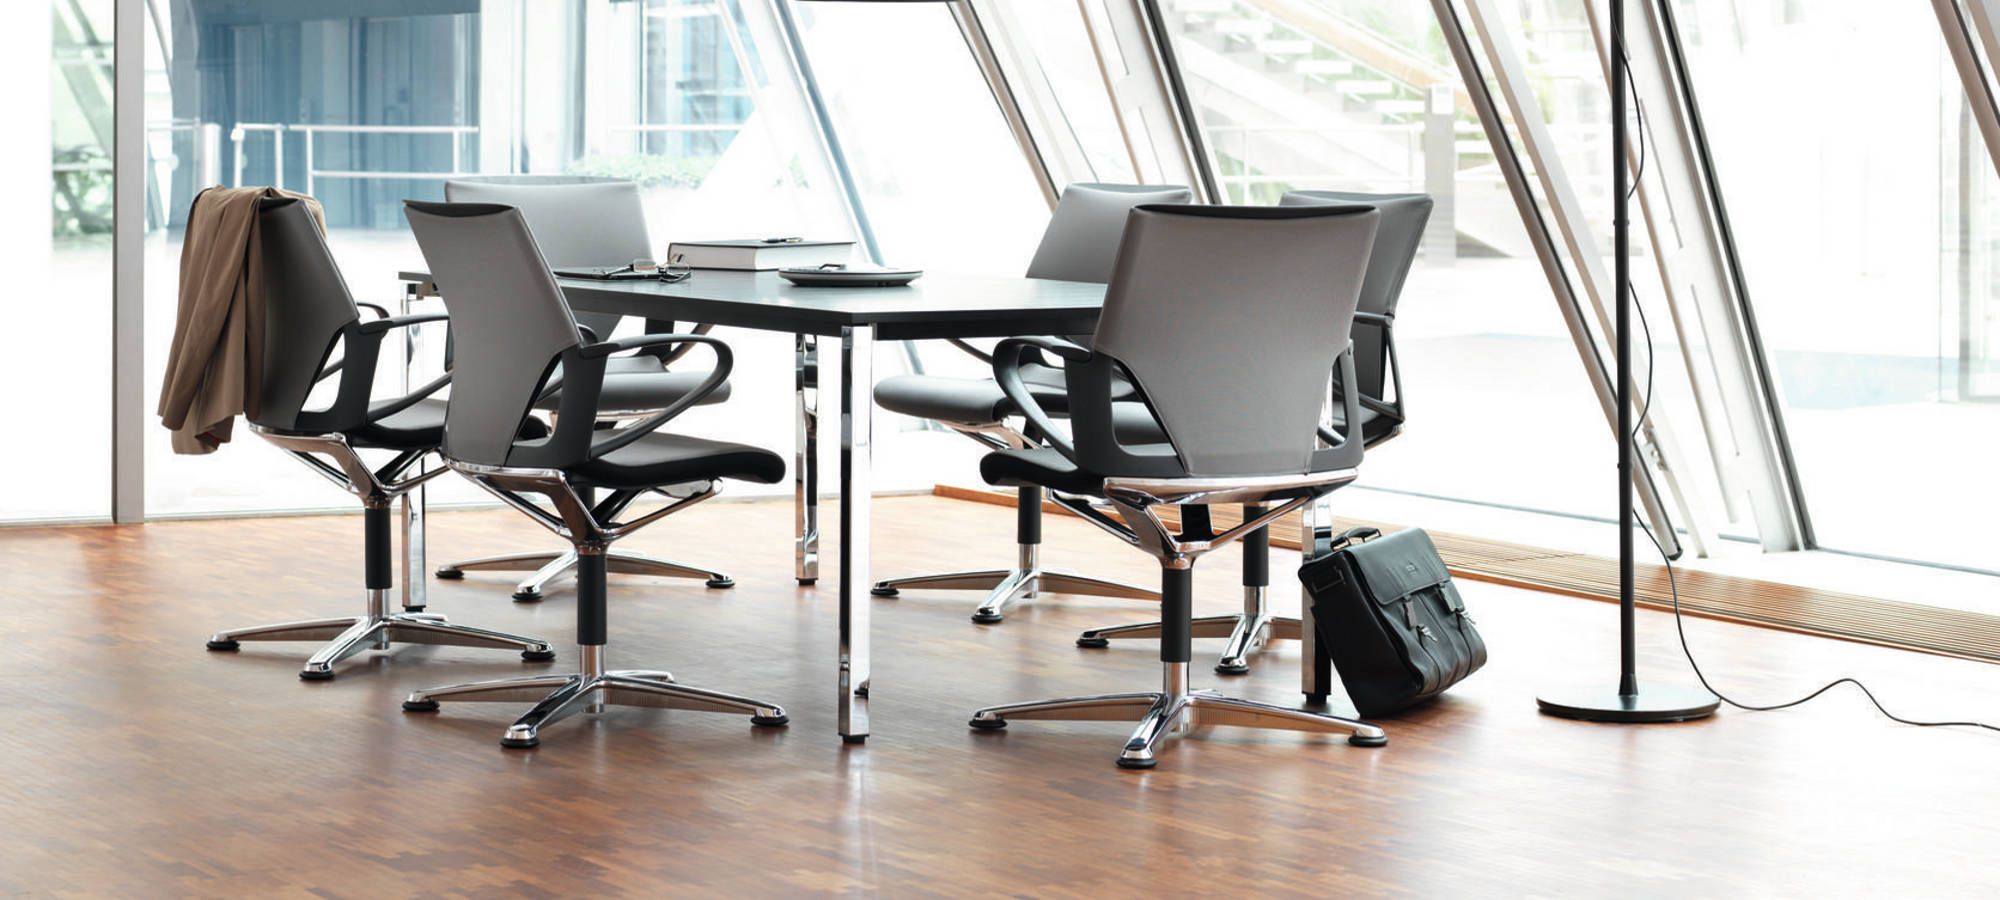 About to invest your money in office chairs? Follow these tips to know more